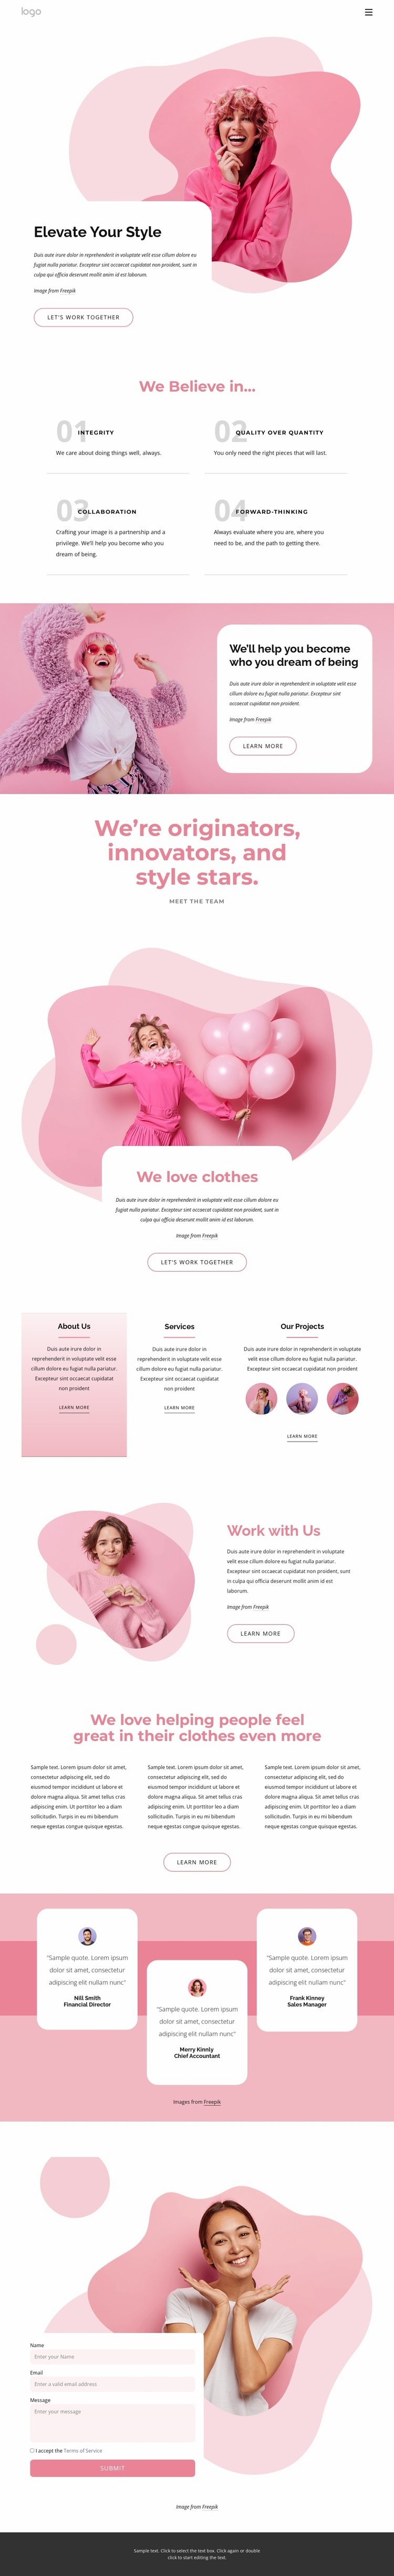 Elevate your style Squarespace Template Alternative